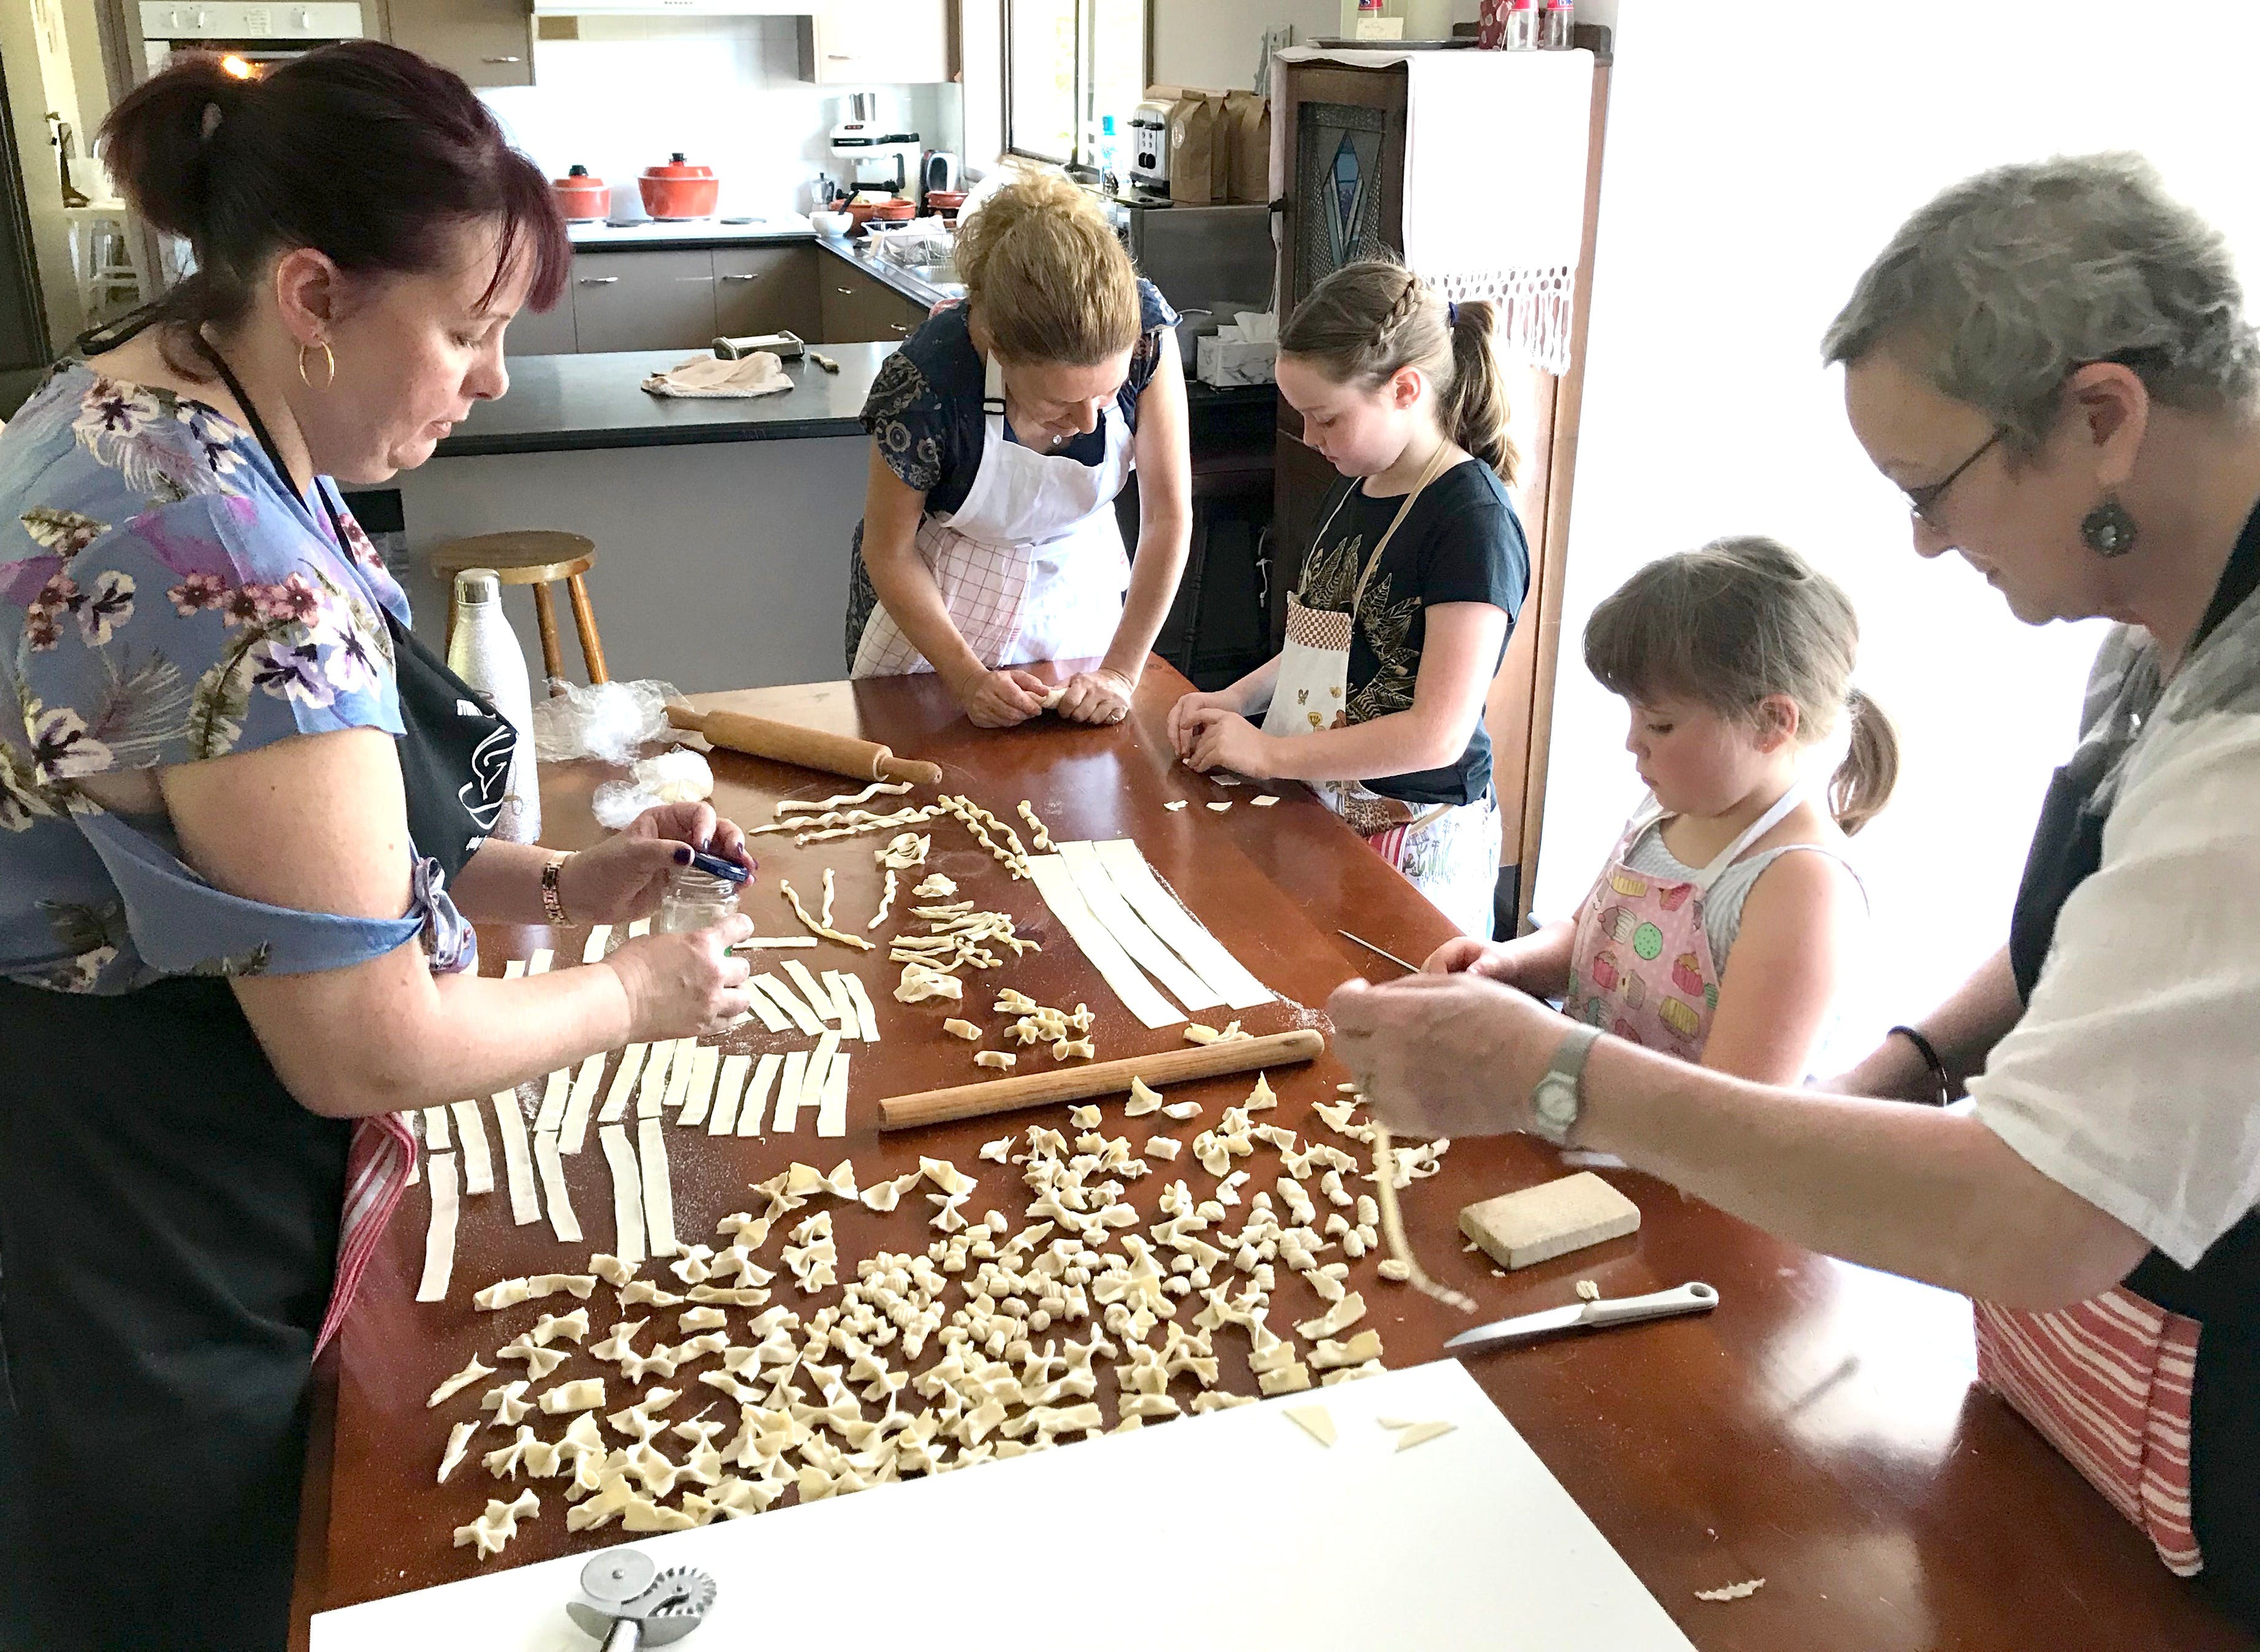 Kids Pasta Making Class - hands on fun at your house - Accommodation QLD